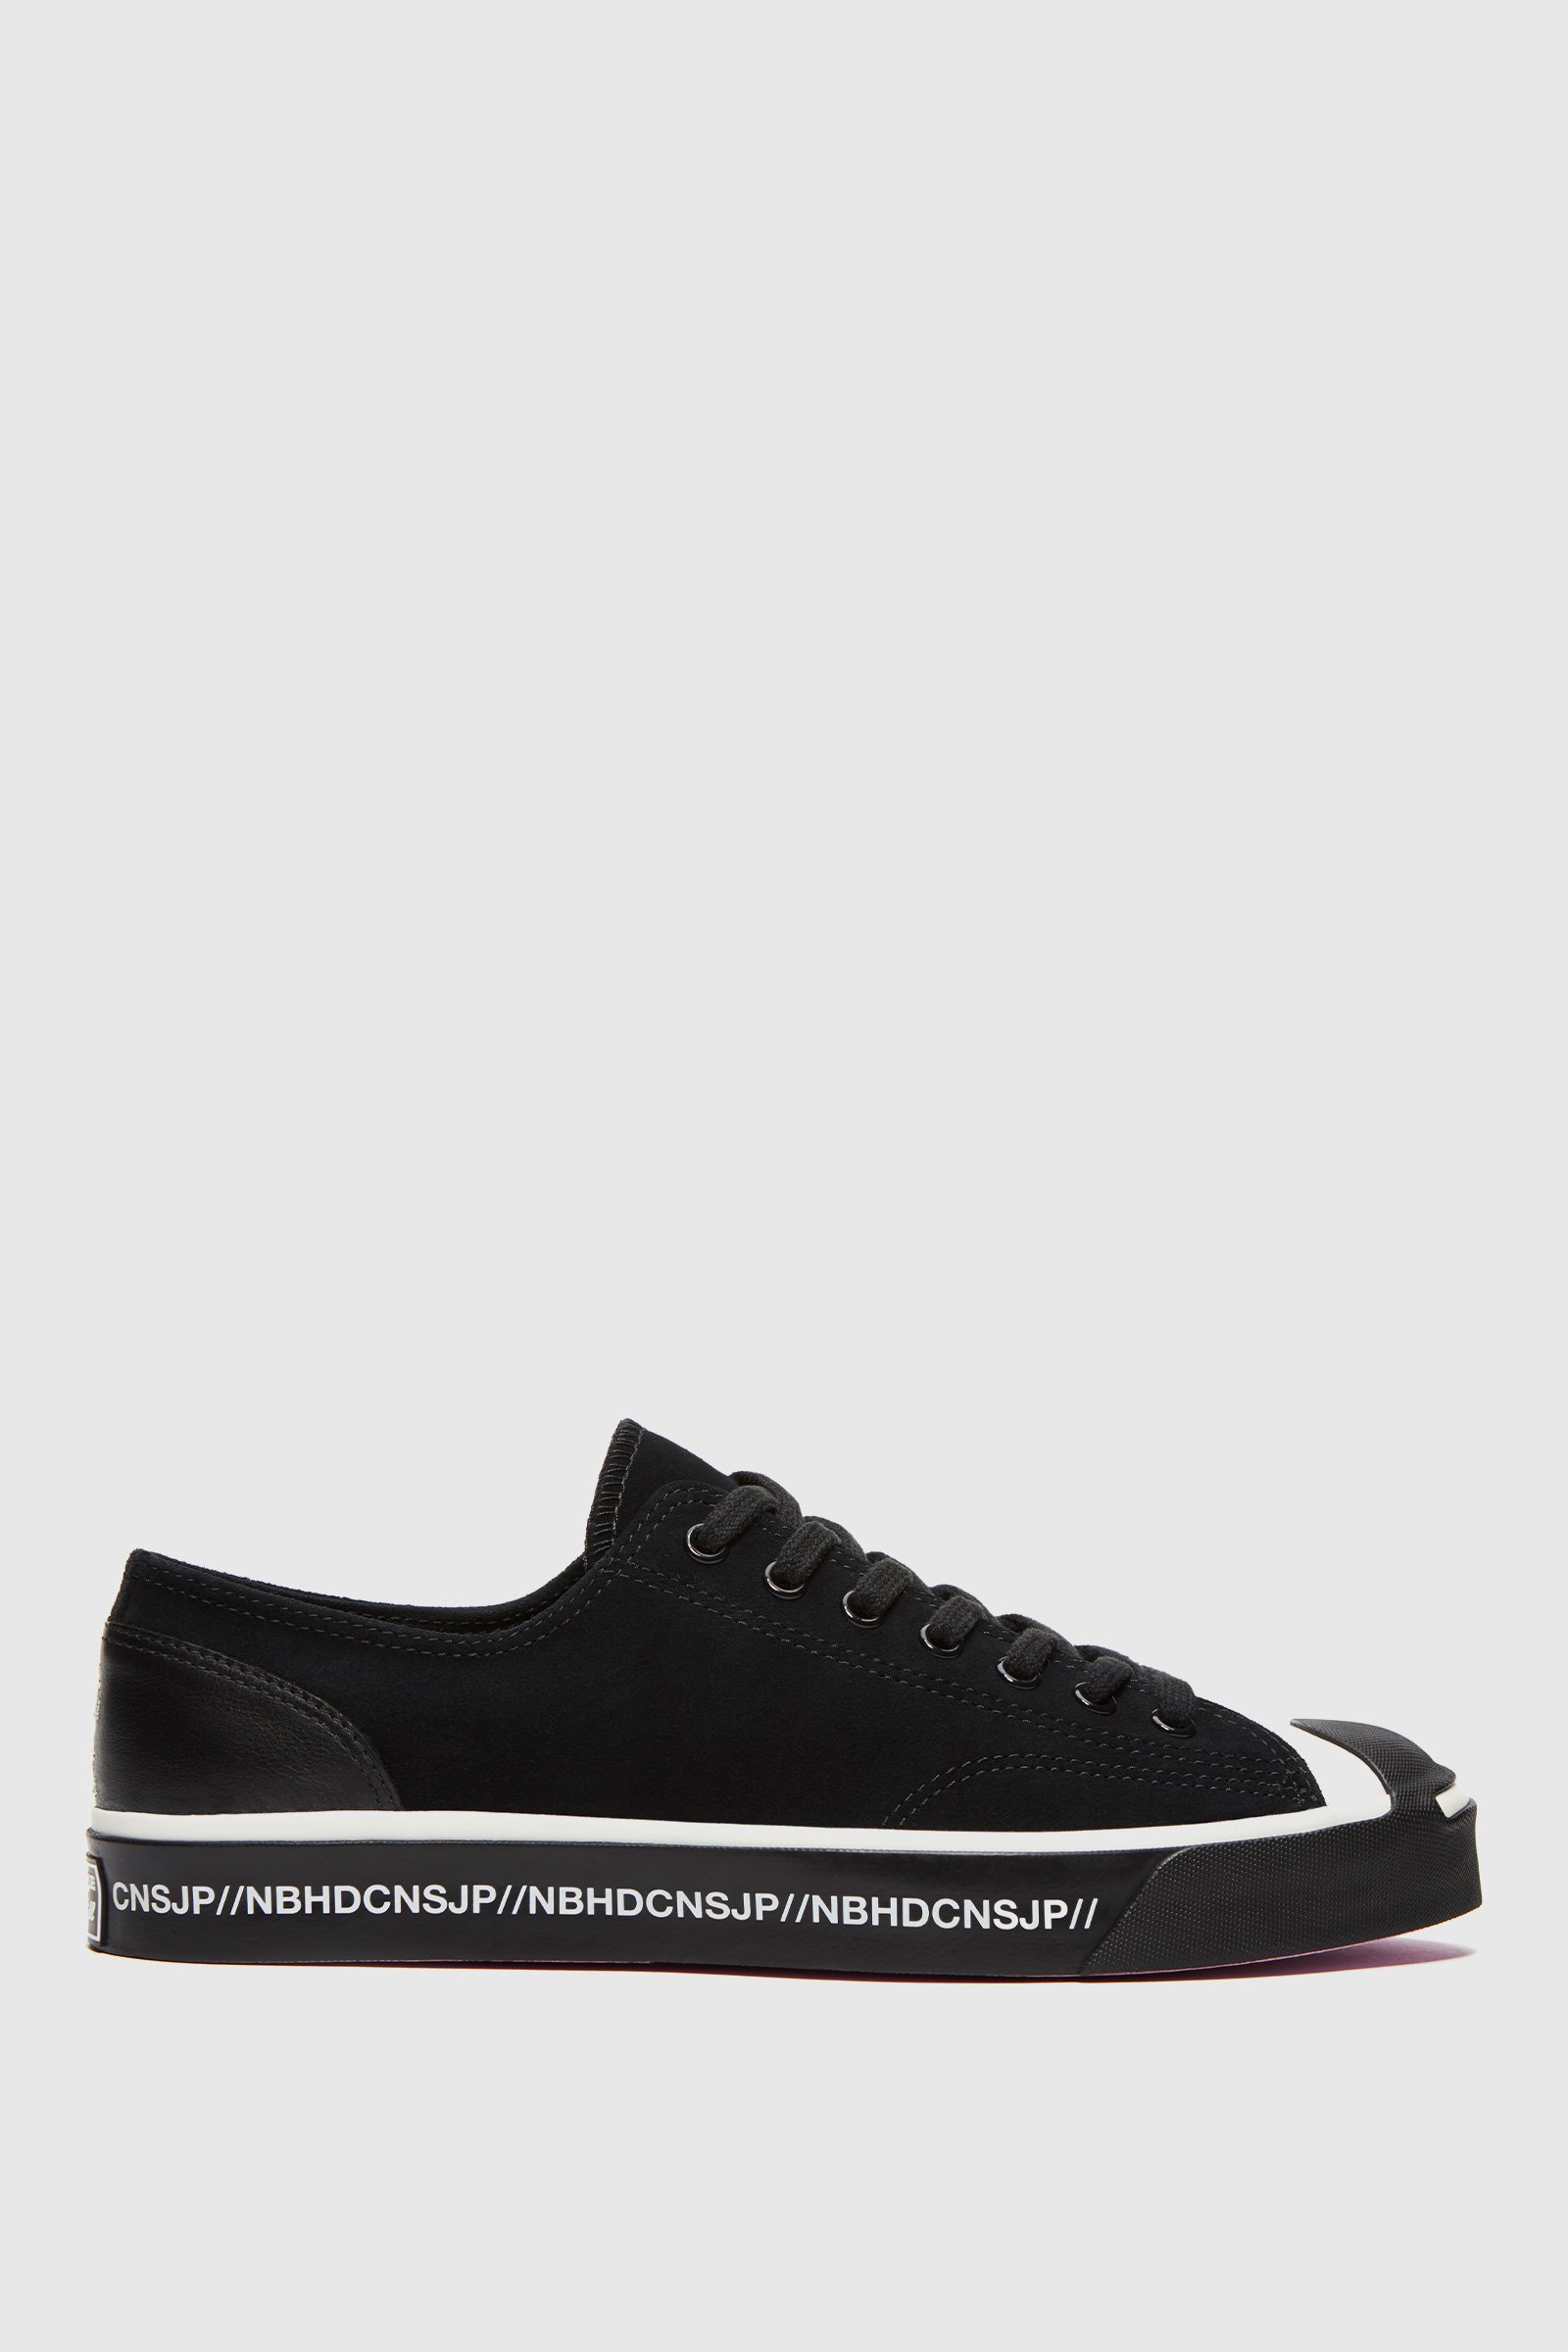 jack purcell ox black